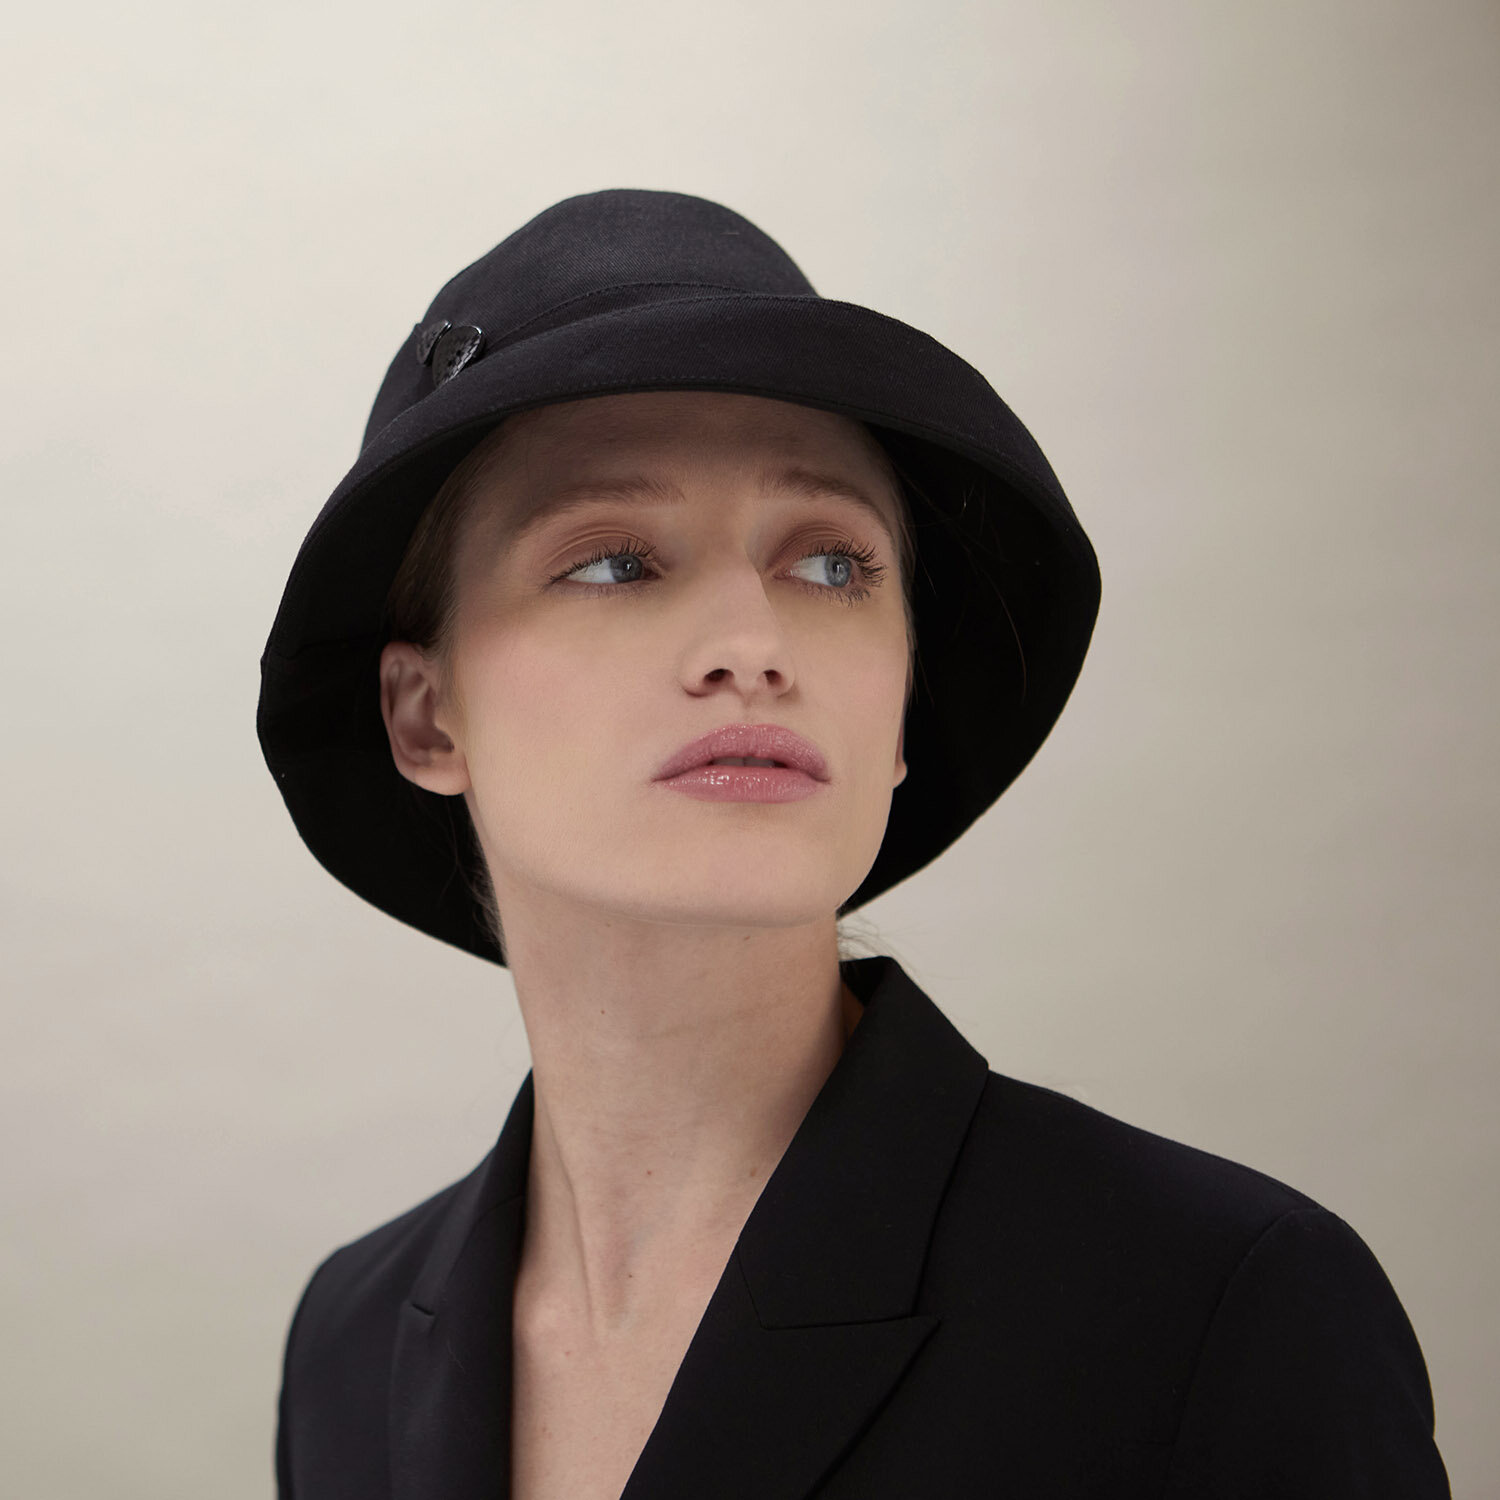   ‘Lianne’ hat in black cotton.    Photo by James Champion 